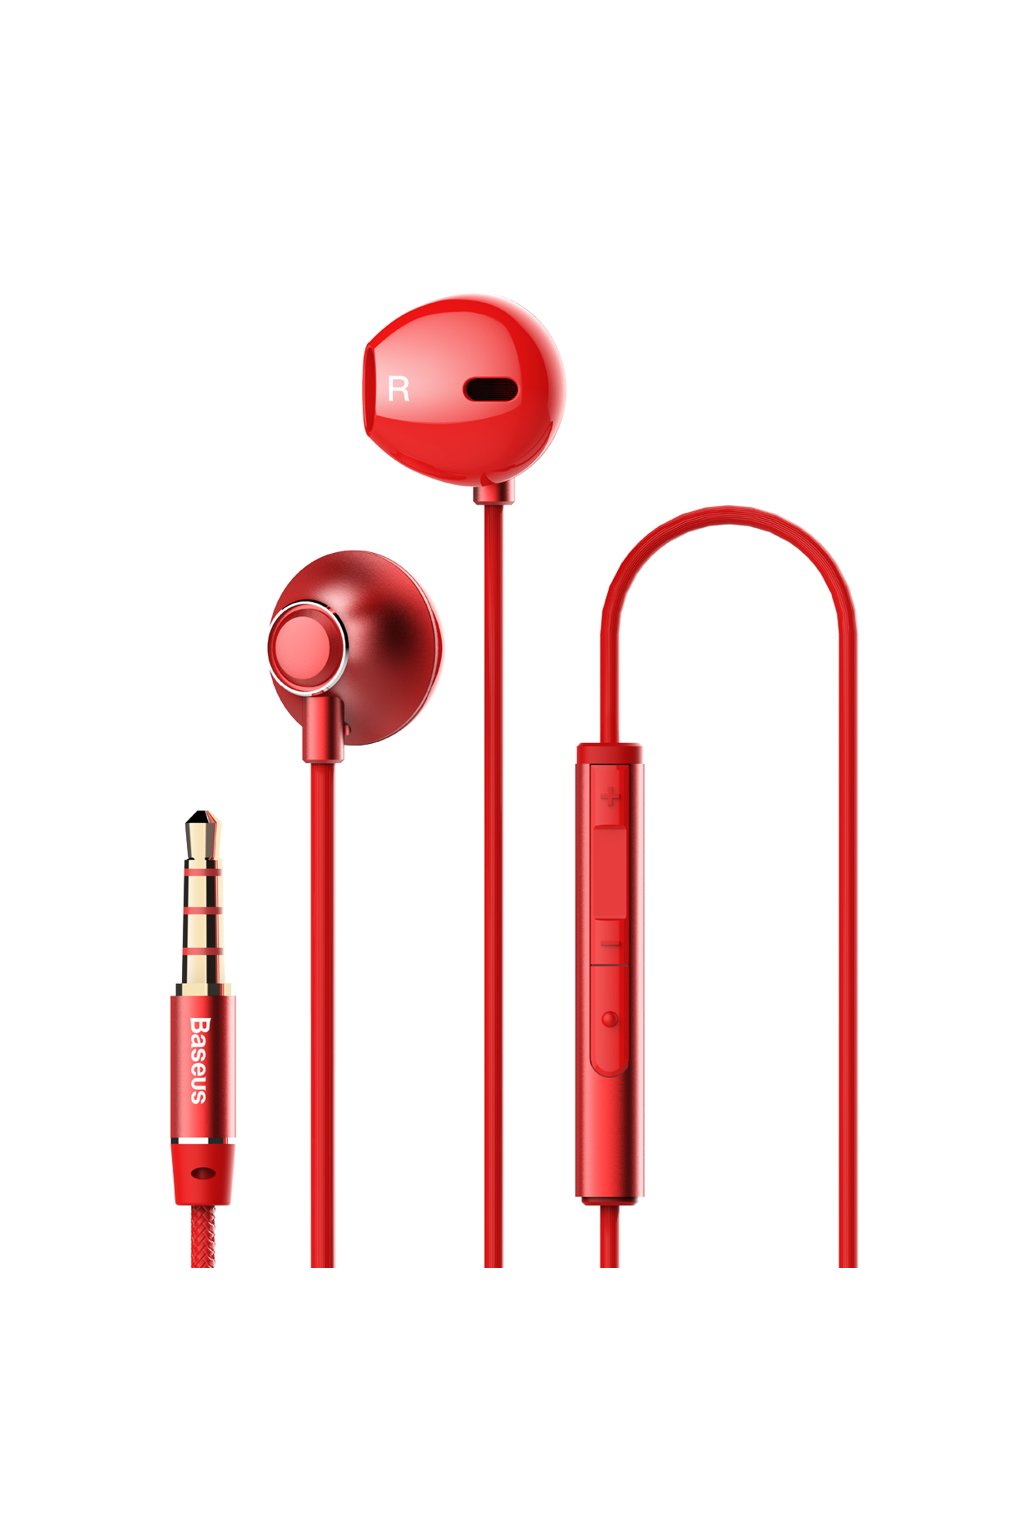 eng pl Baseus Enock H06 Lateral Earphones Earbuds Headphones with Remote Control red NGH06 09 46838 1